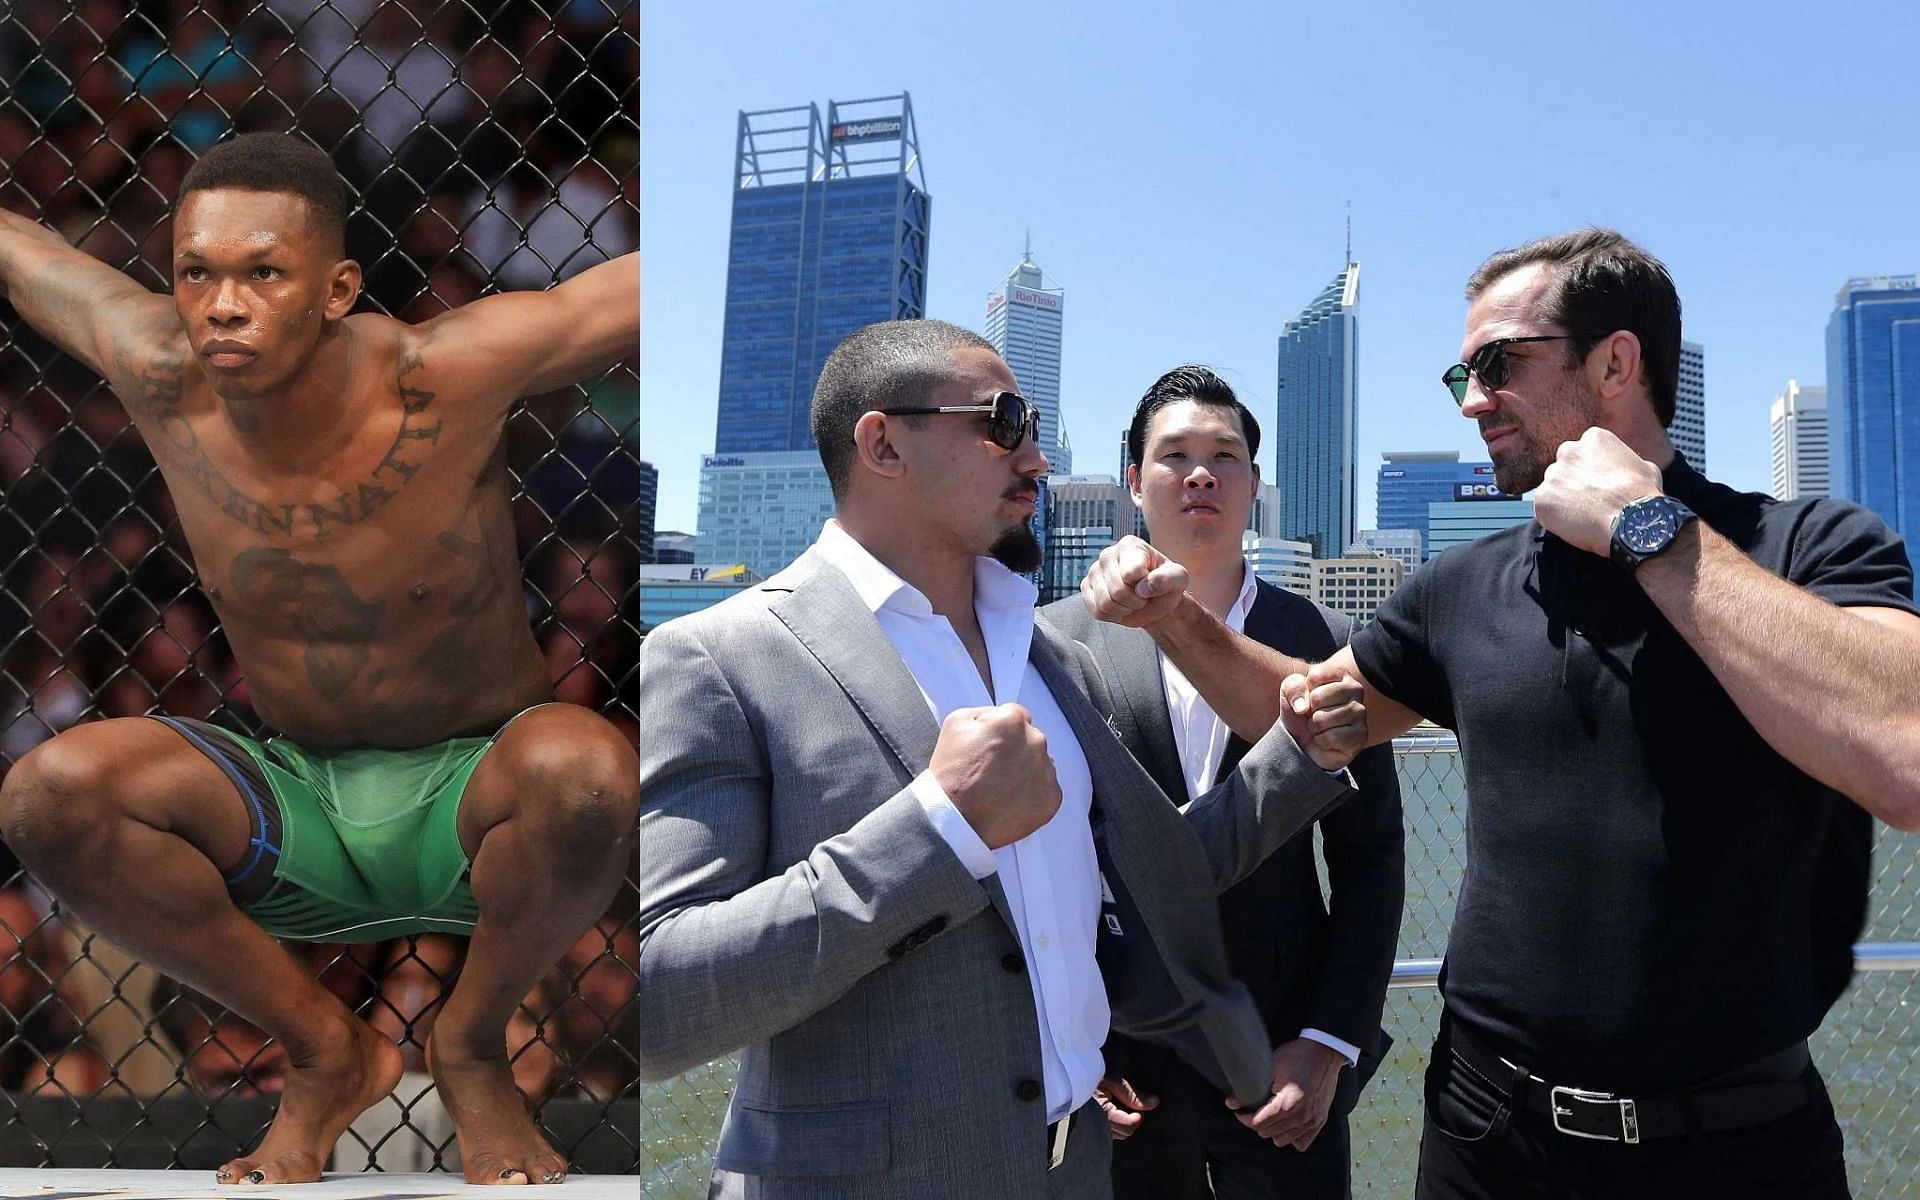 Israel Adesanya (Left), Robert Whittaker and Luke Rockhold (Right) (Images courtesy of Getty)